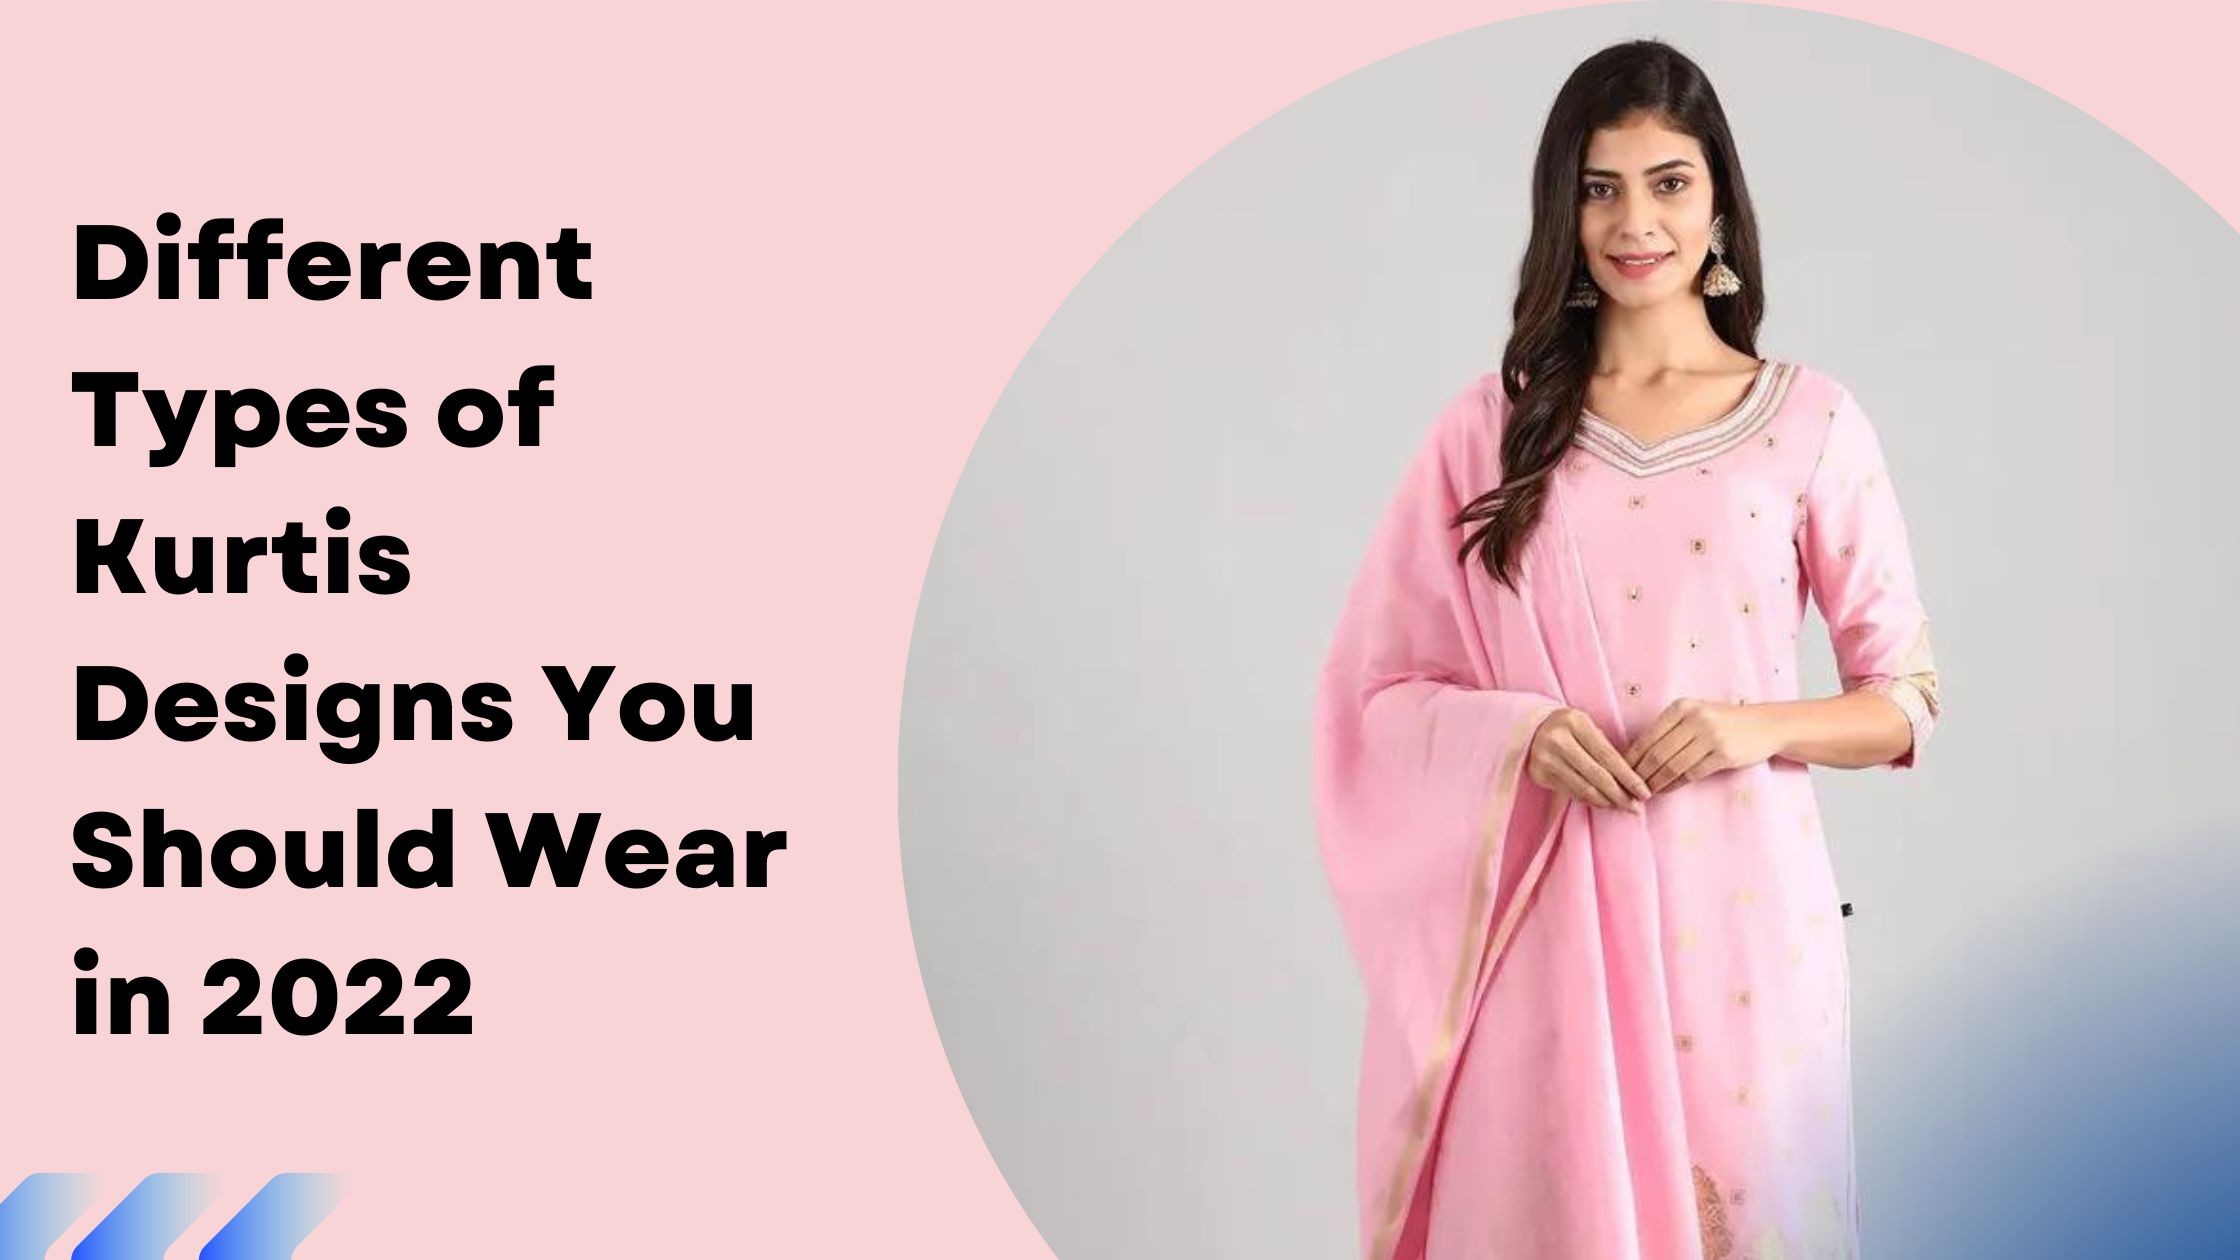 Different Types of Kurtis Designs You Should Wear in 2022